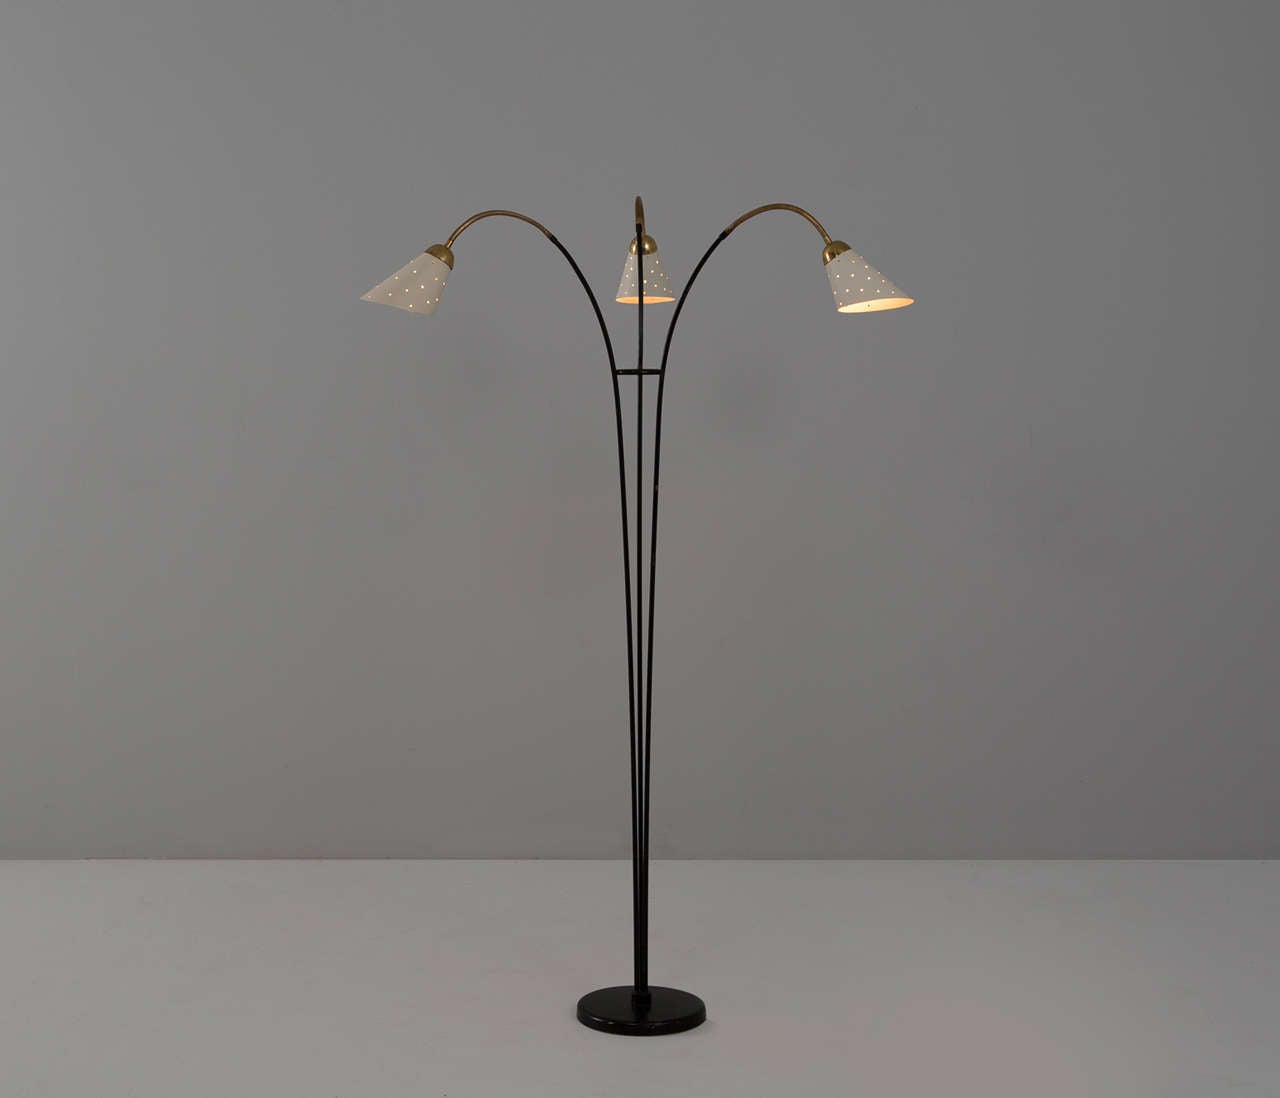 Adjustable italian floor lamp with elegant brass details. The base is made of black coated steel.

The shade are off white lacquered, and due the perforated pattern a nice light partition is created.
